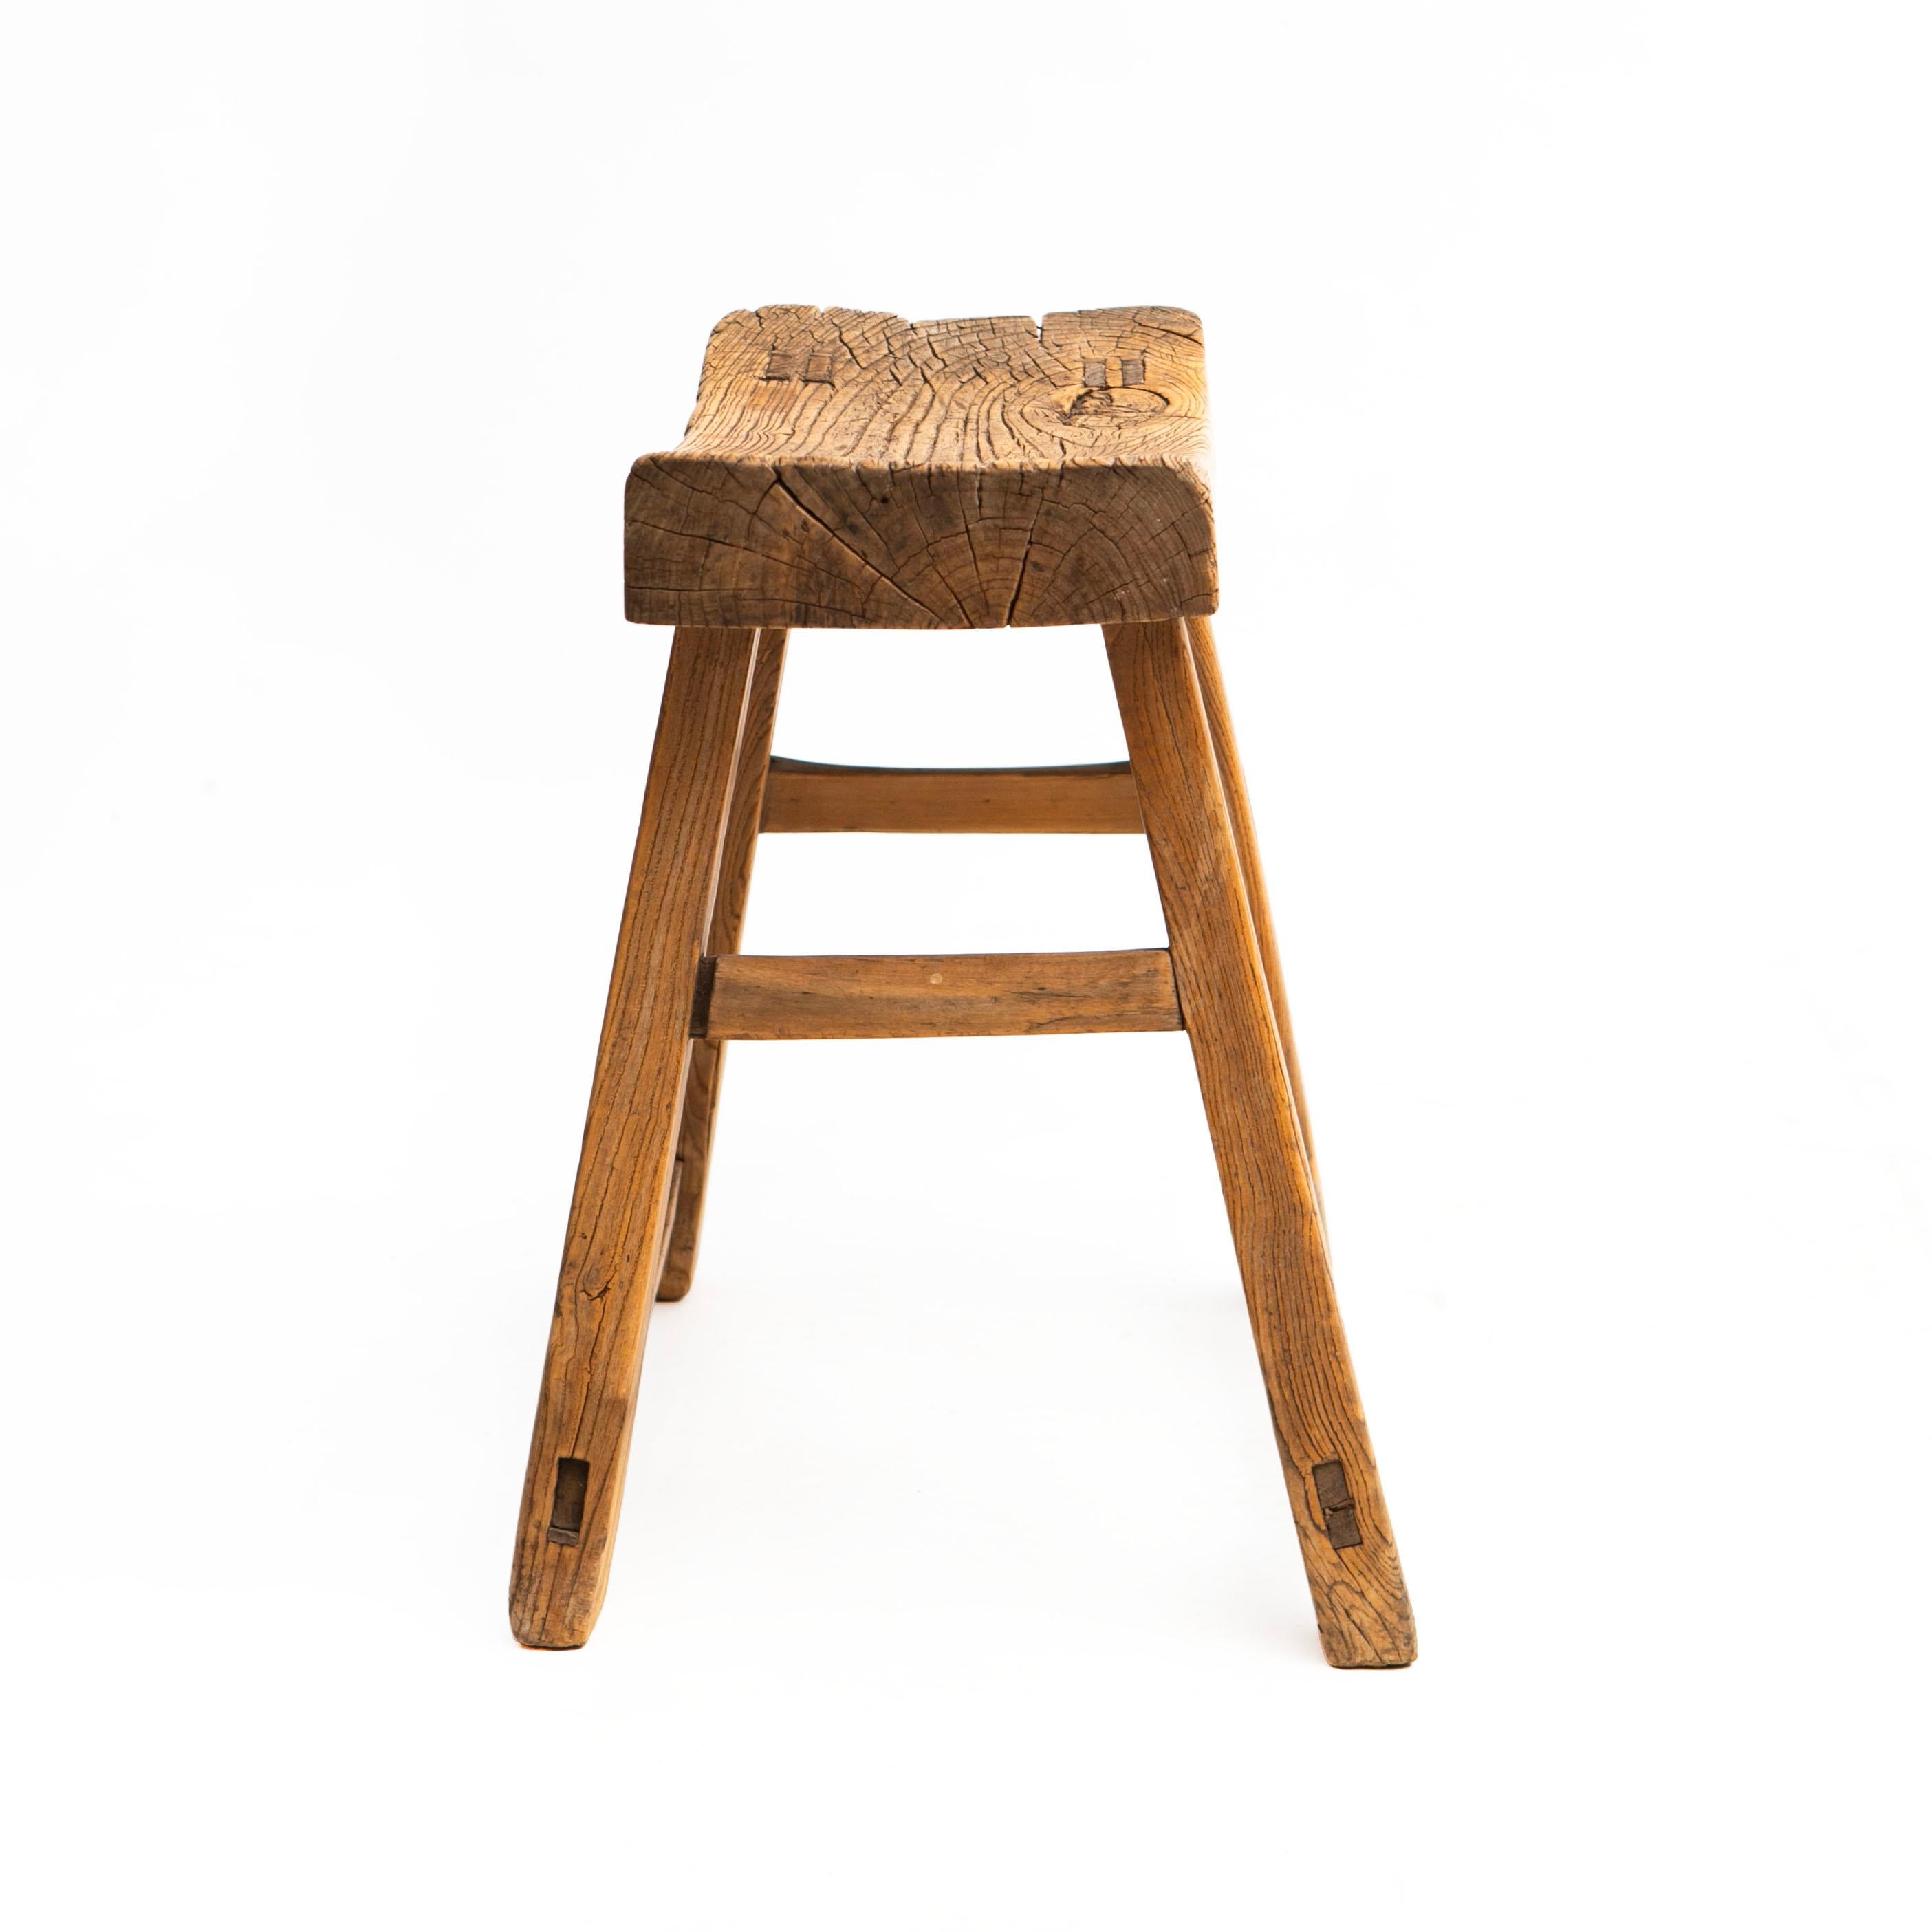 Rustic Chinese 18-19th Century Elmwood Stool In Good Condition For Sale In Kastrup, DK